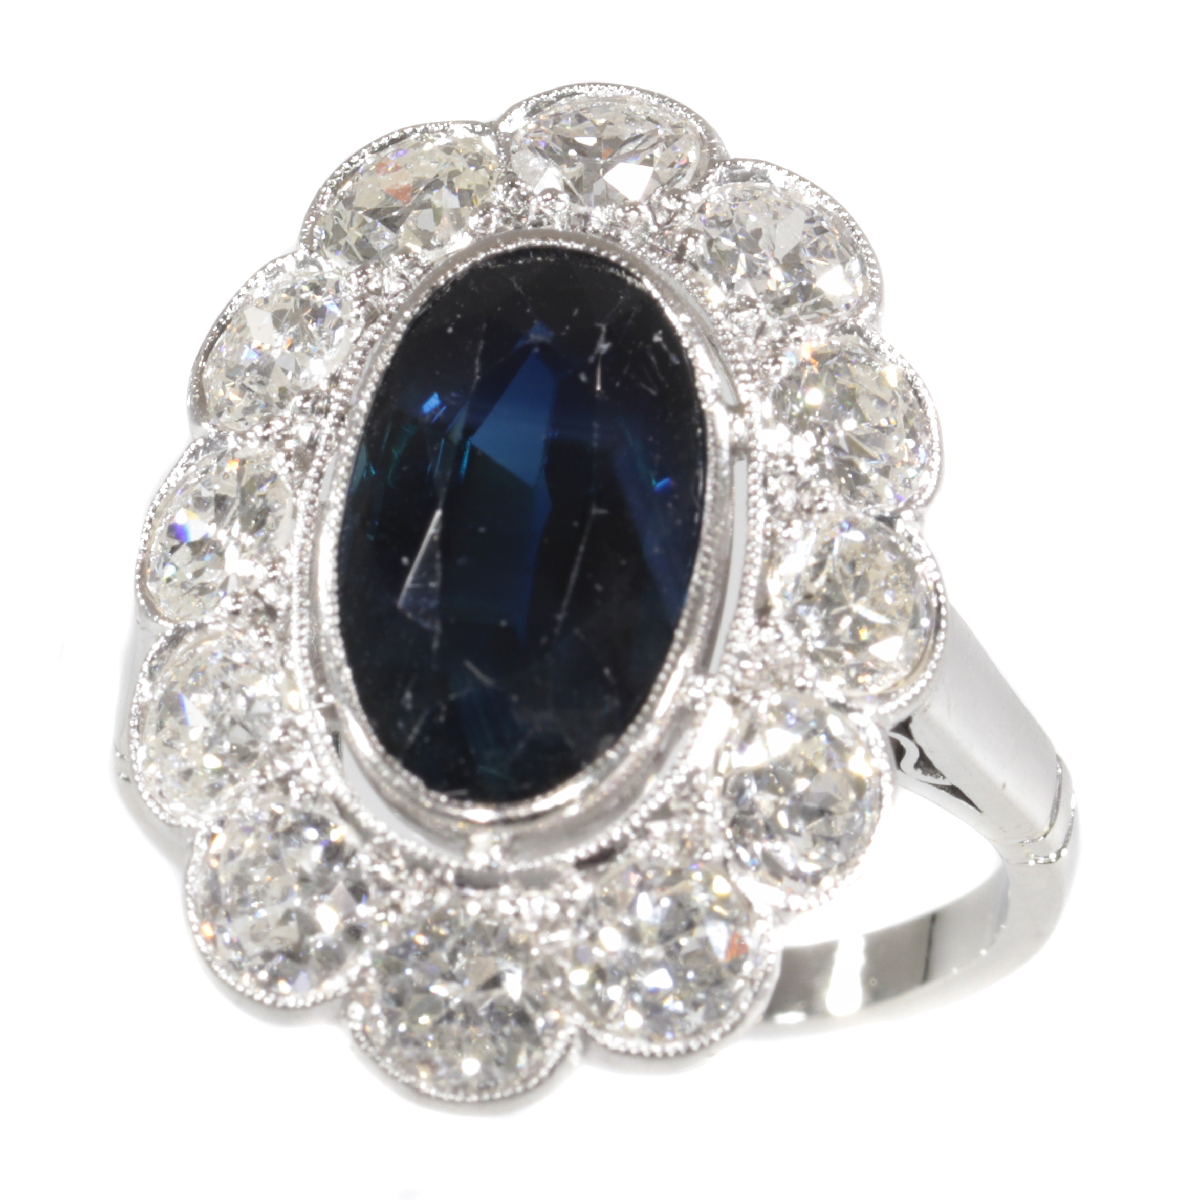 Vintage 1950's platinum diamond and sapphire engagement ring - lady Di style